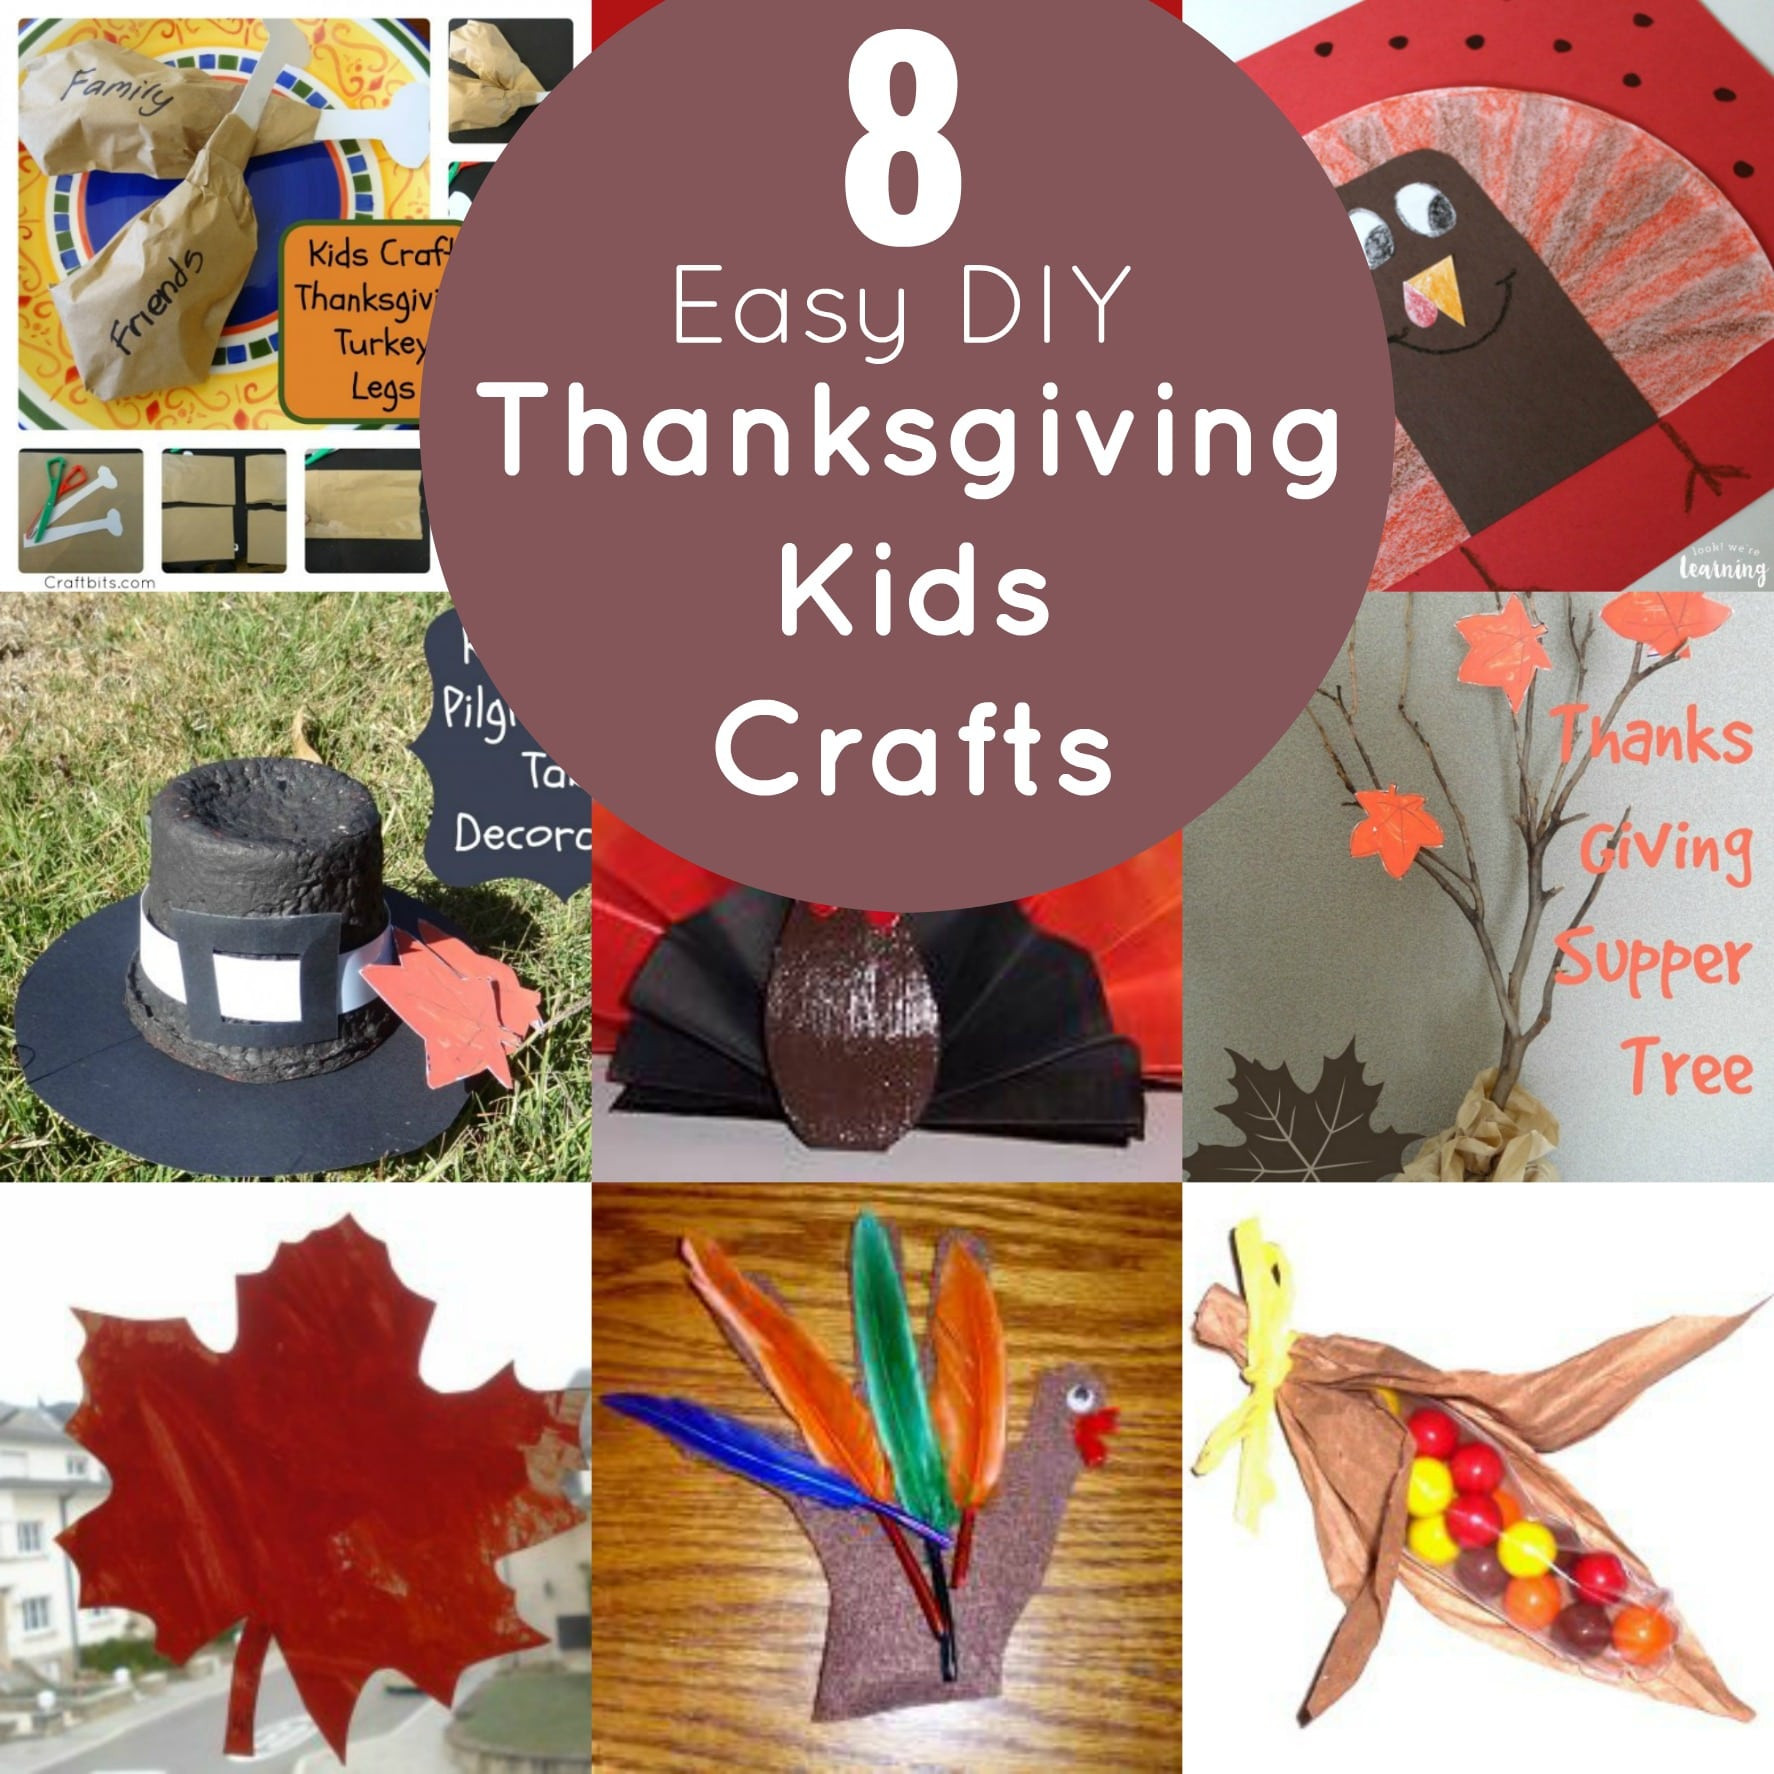 DIY Thanksgiving Crafts For Toddlers
 8 Easy DIY Thanksgiving Crafts for Kids